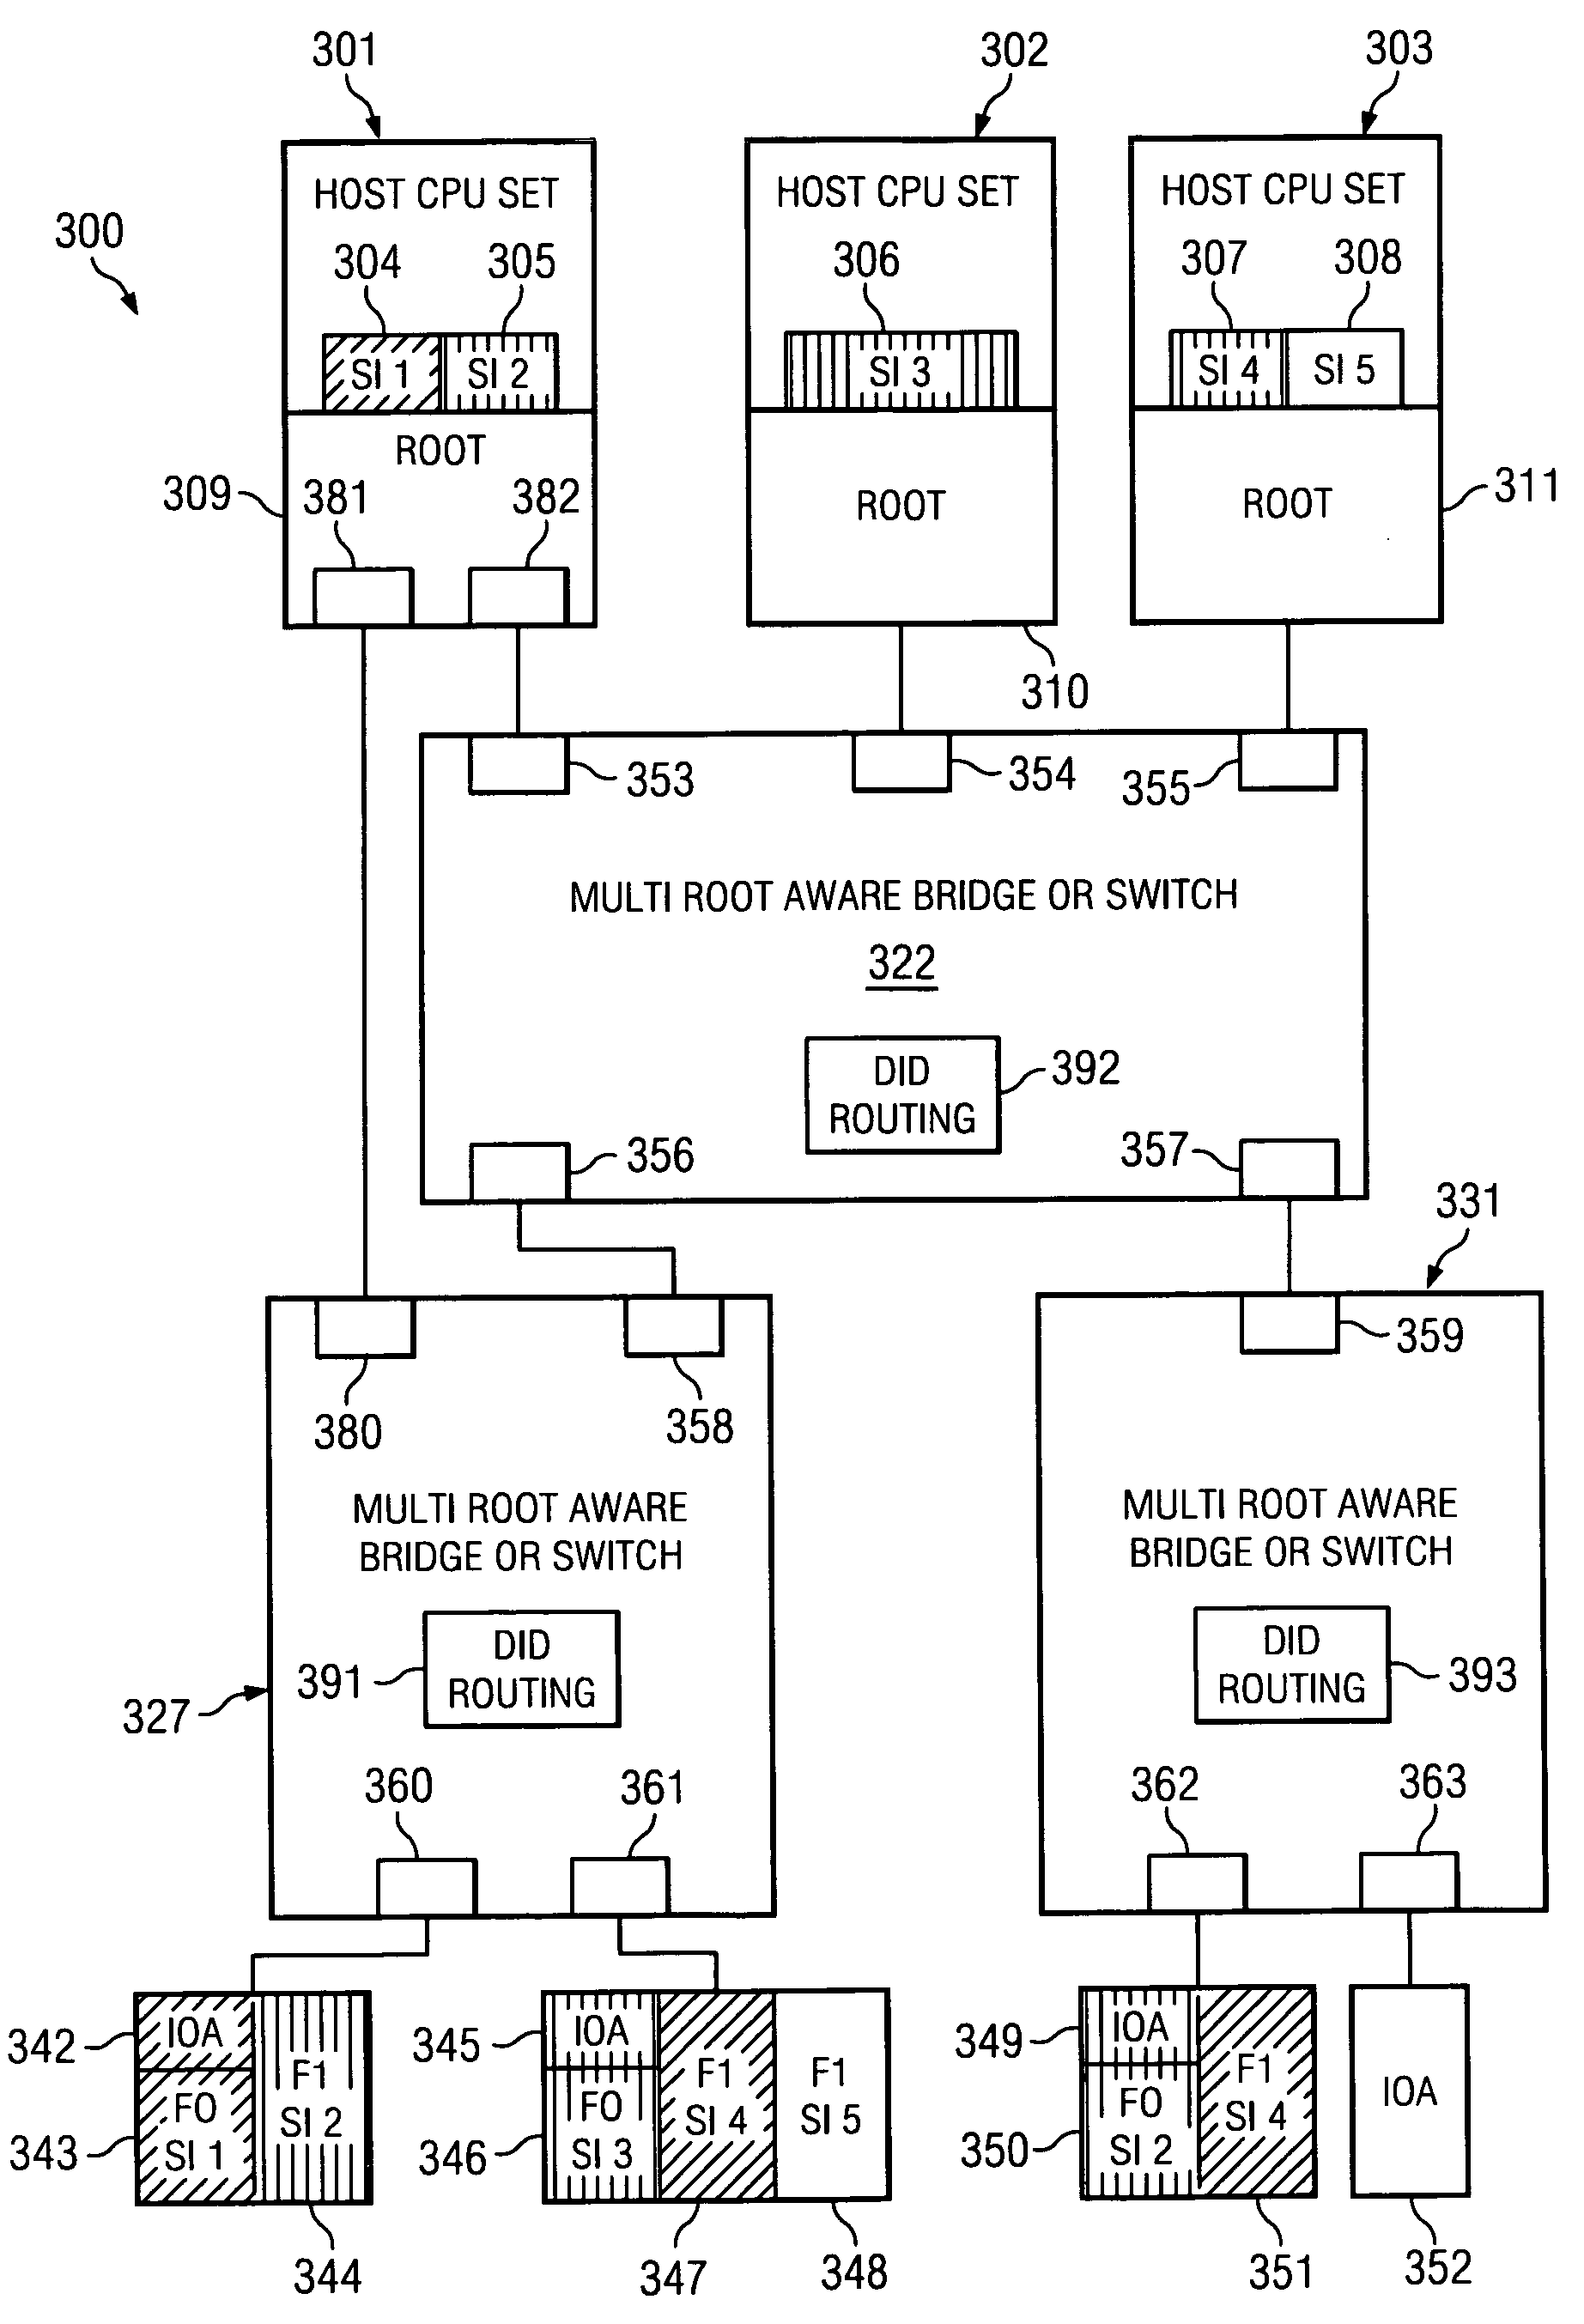 Routing mechanism in PCI multi-host topologies using destination ID field